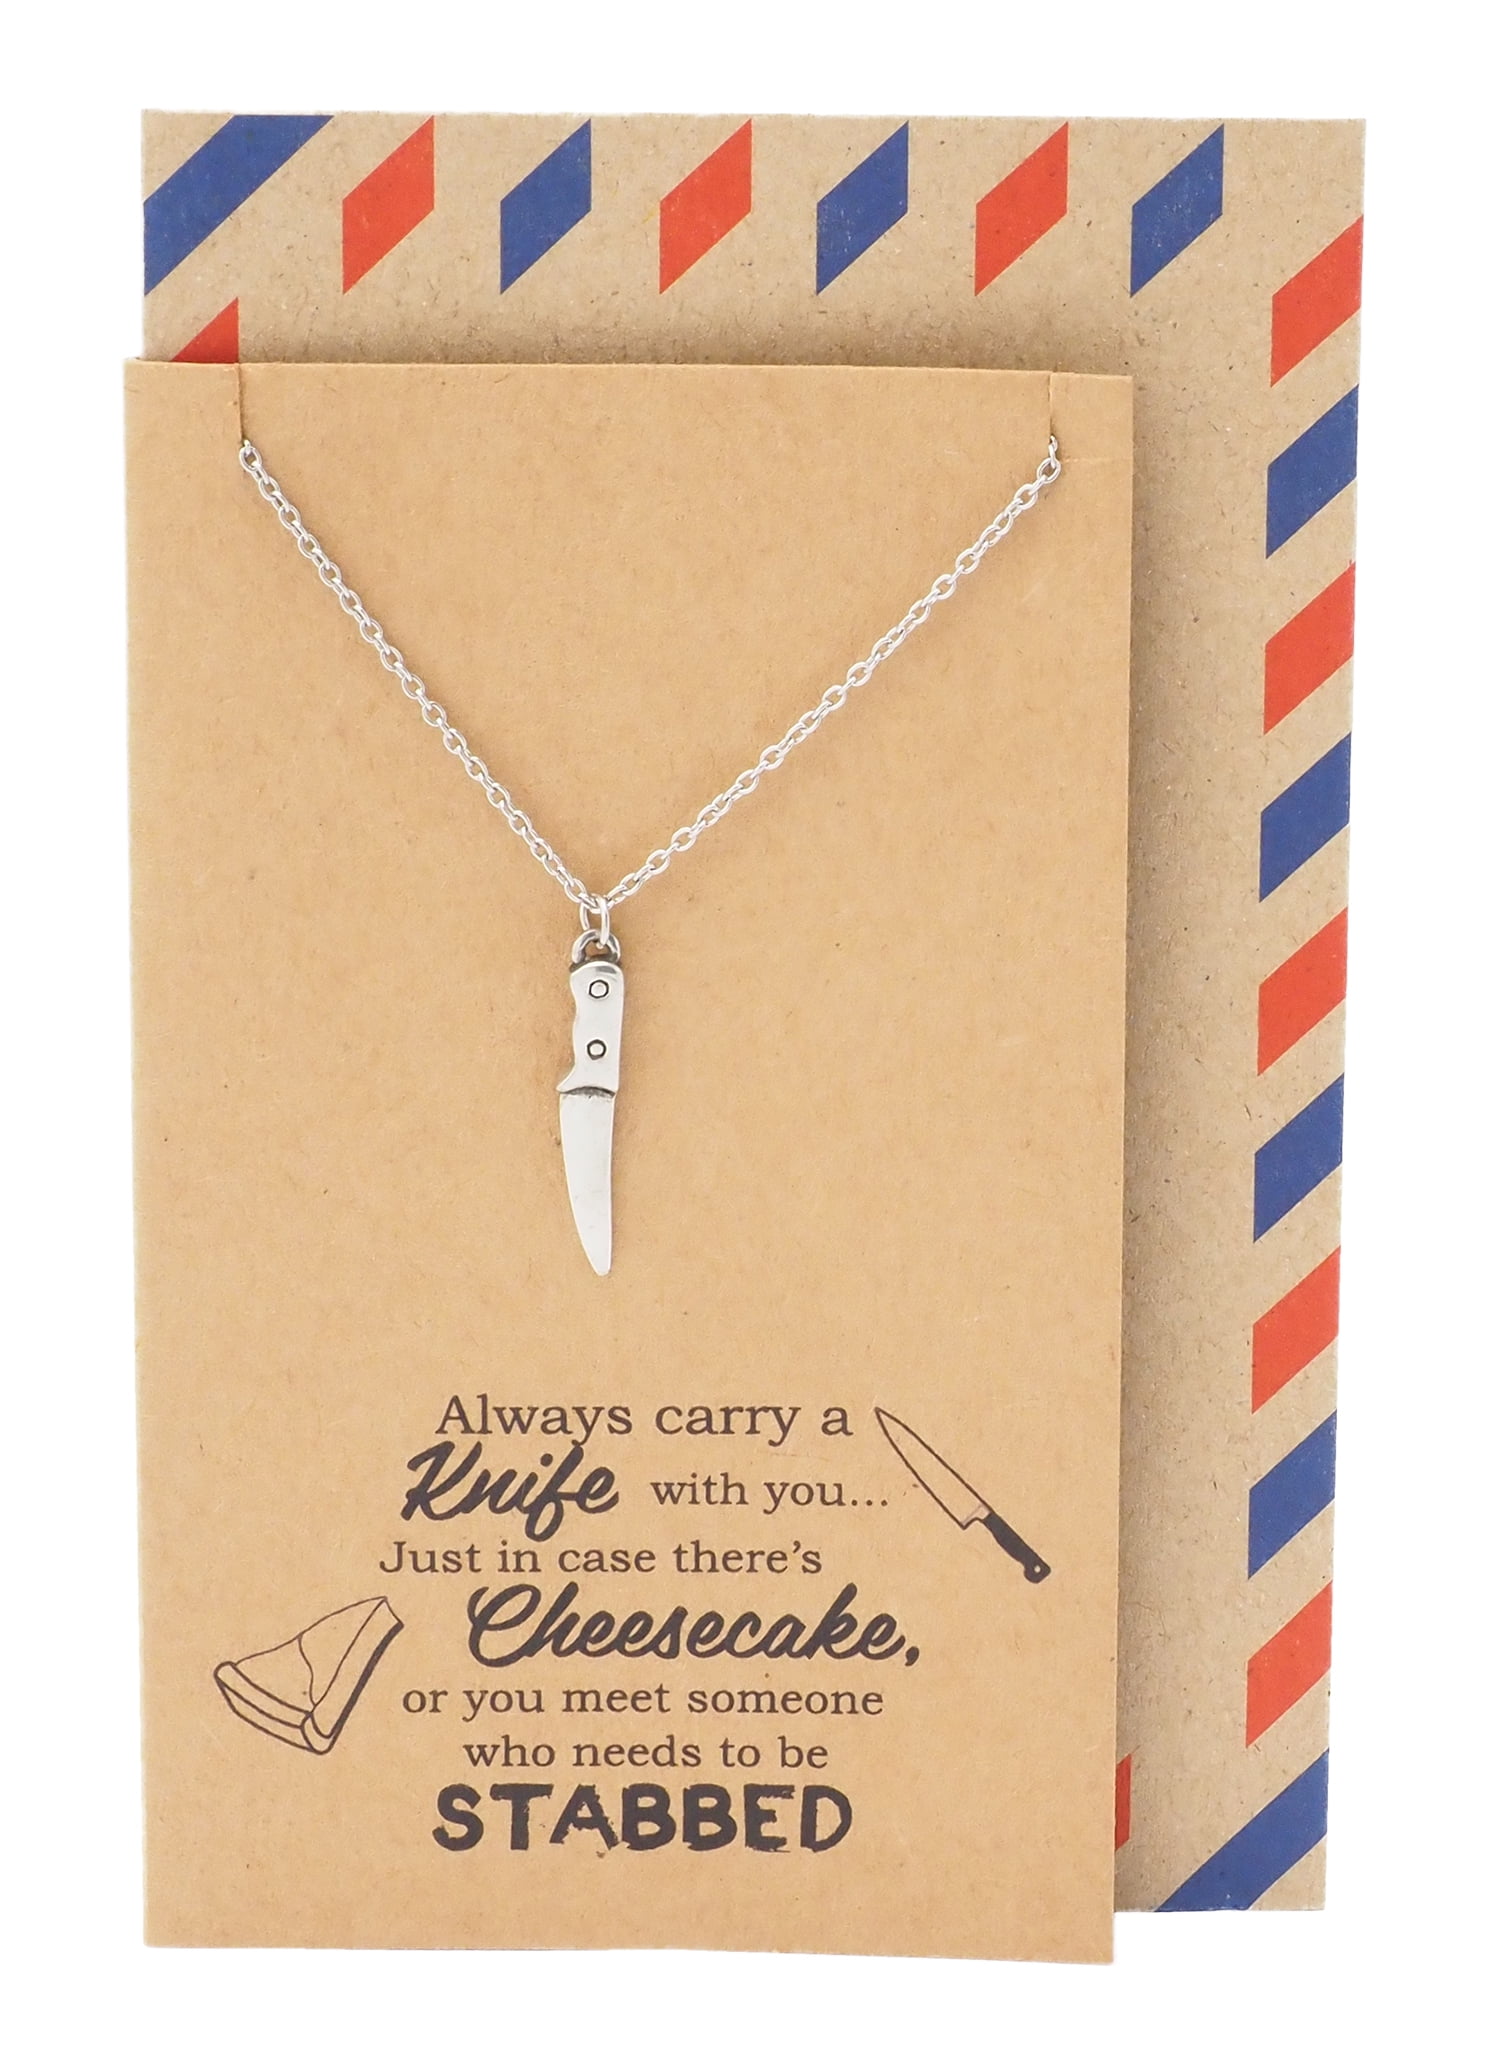 Jewelry, Silvertone Paper Airplane Necklace